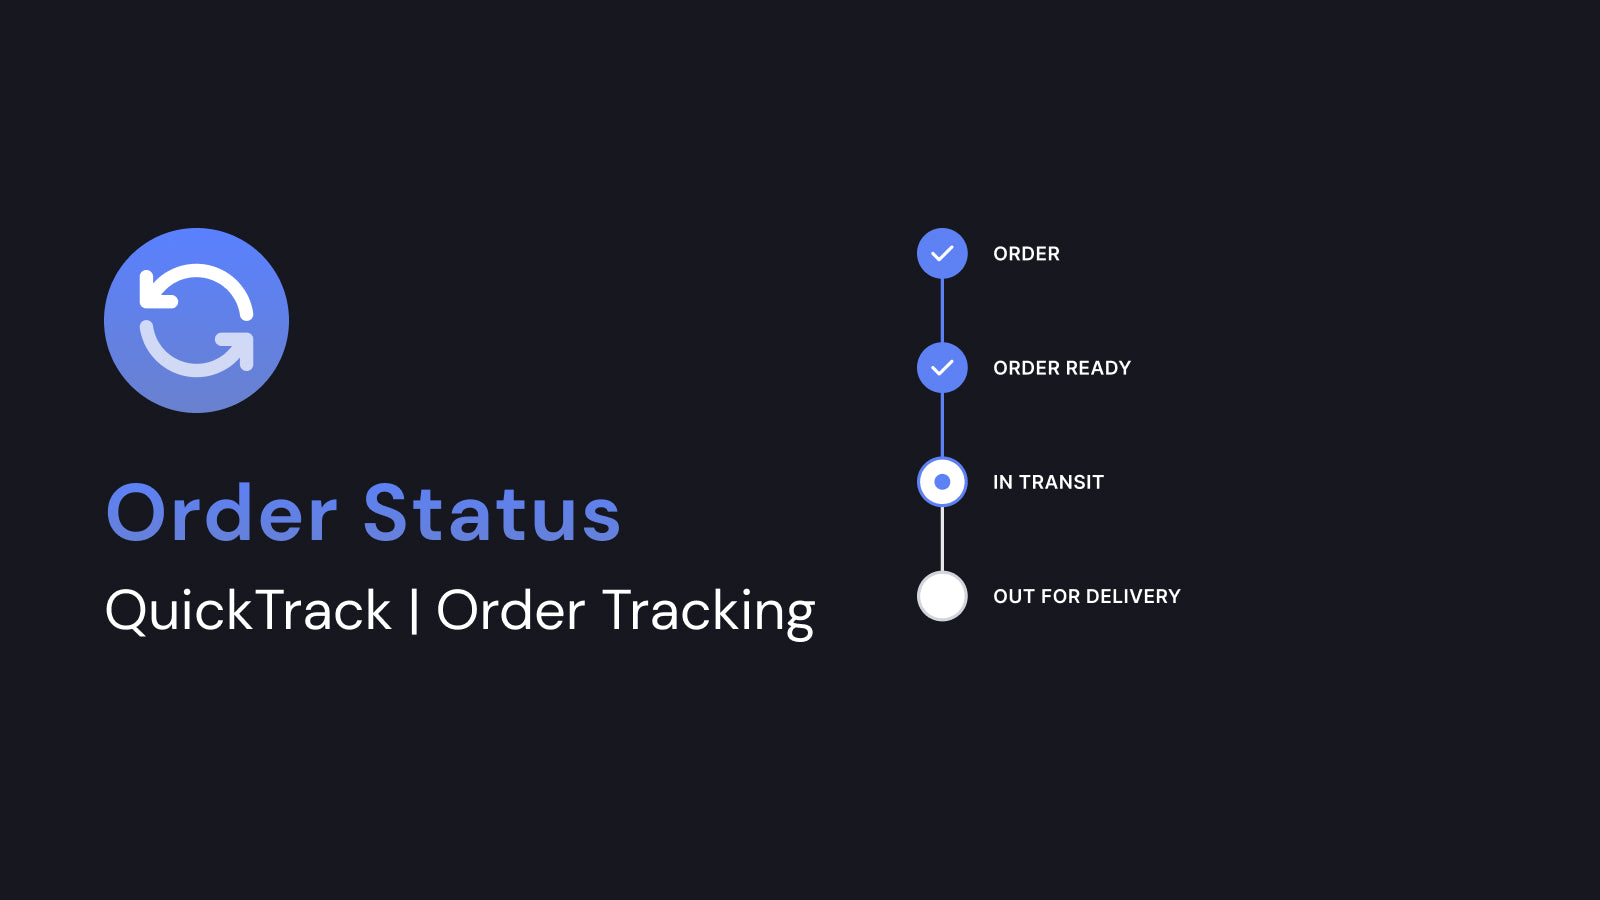 Order Status home page